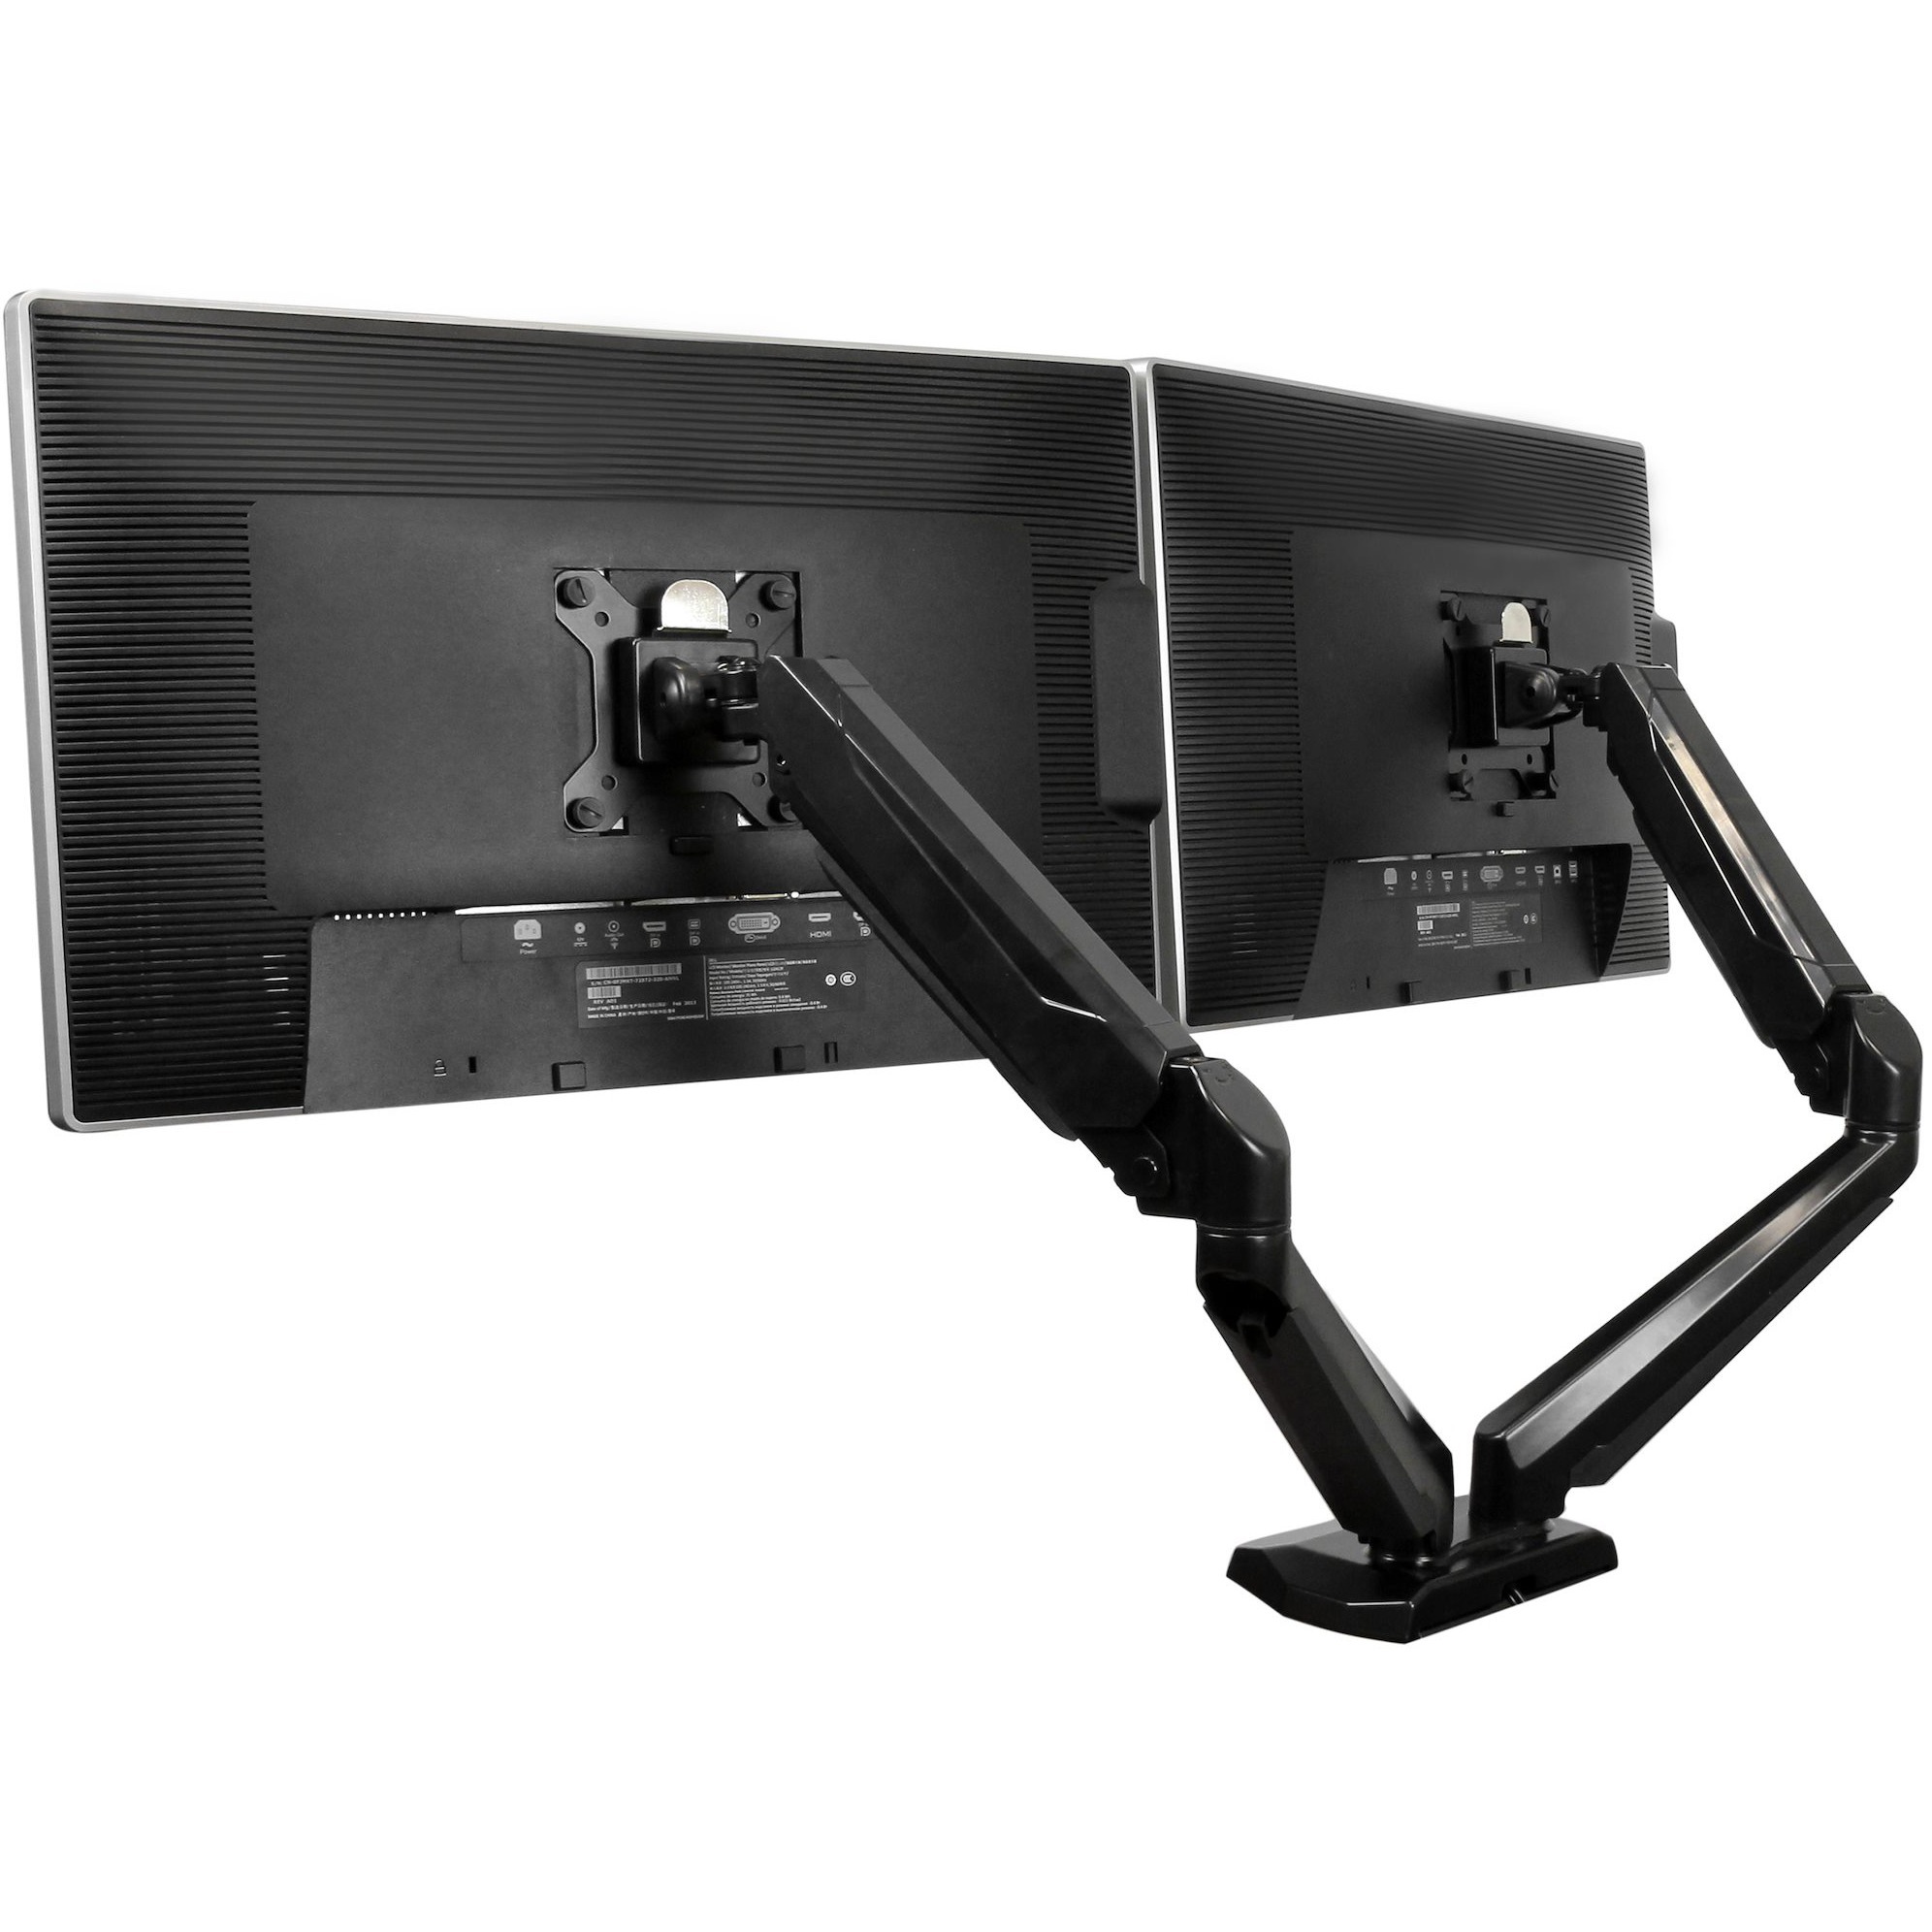 StarTech.com Dual Monitor Arm, USB Hub and Audio Ports in Base, Monitors up  to 32 (17.6lb/8kg), VESA Monitor Stand Desk Mount - CareTek Information  Technology Solutions